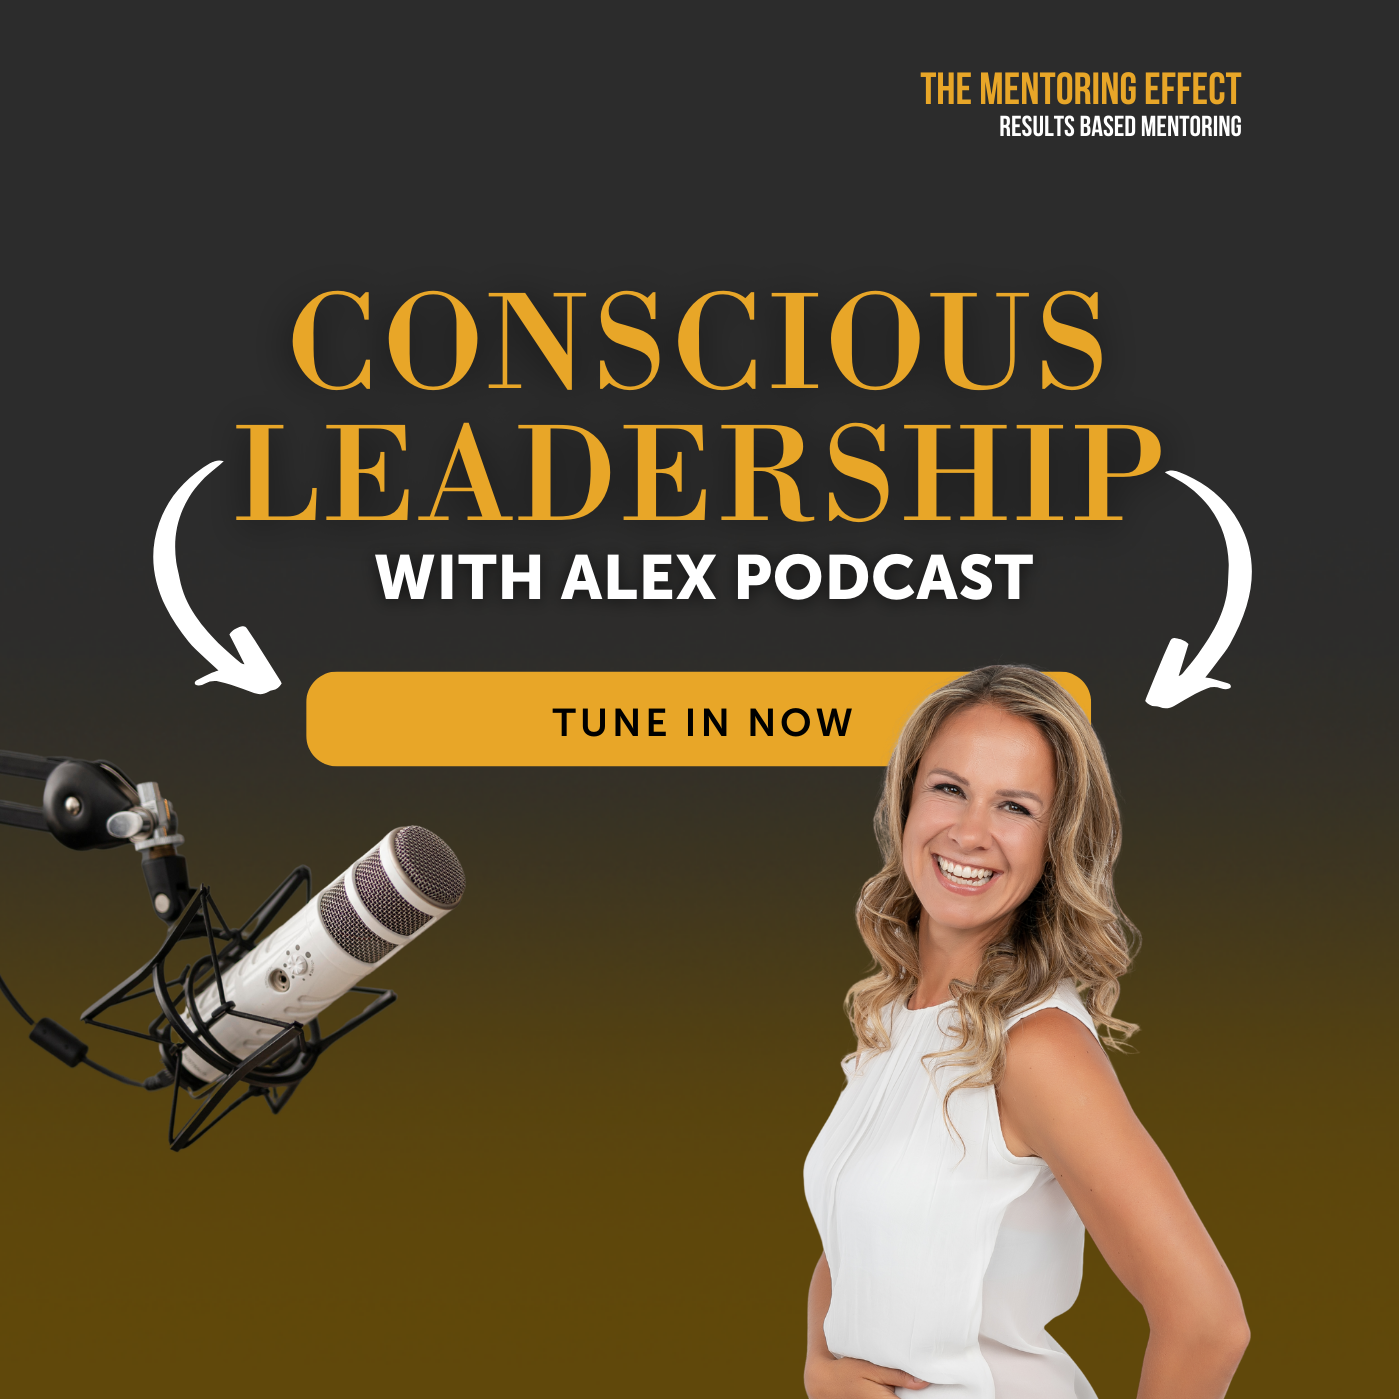 Conscious Leadership with Alex Podcast